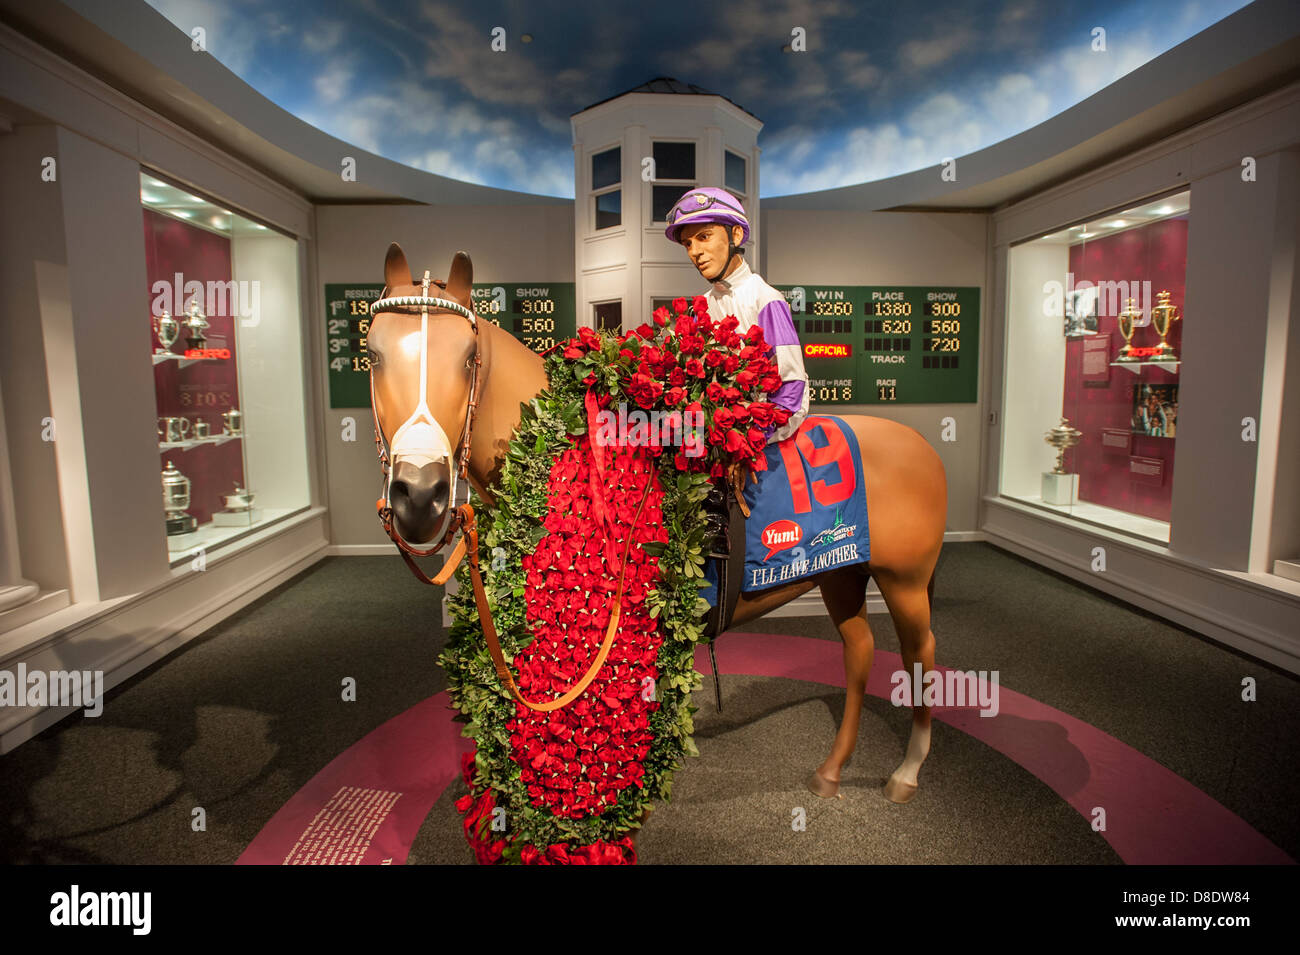 Louisville, Kentucky, Churchill Downs thoroughbred racetrack most famous for hosting the Kentucky Derby. Museum Stock Photo